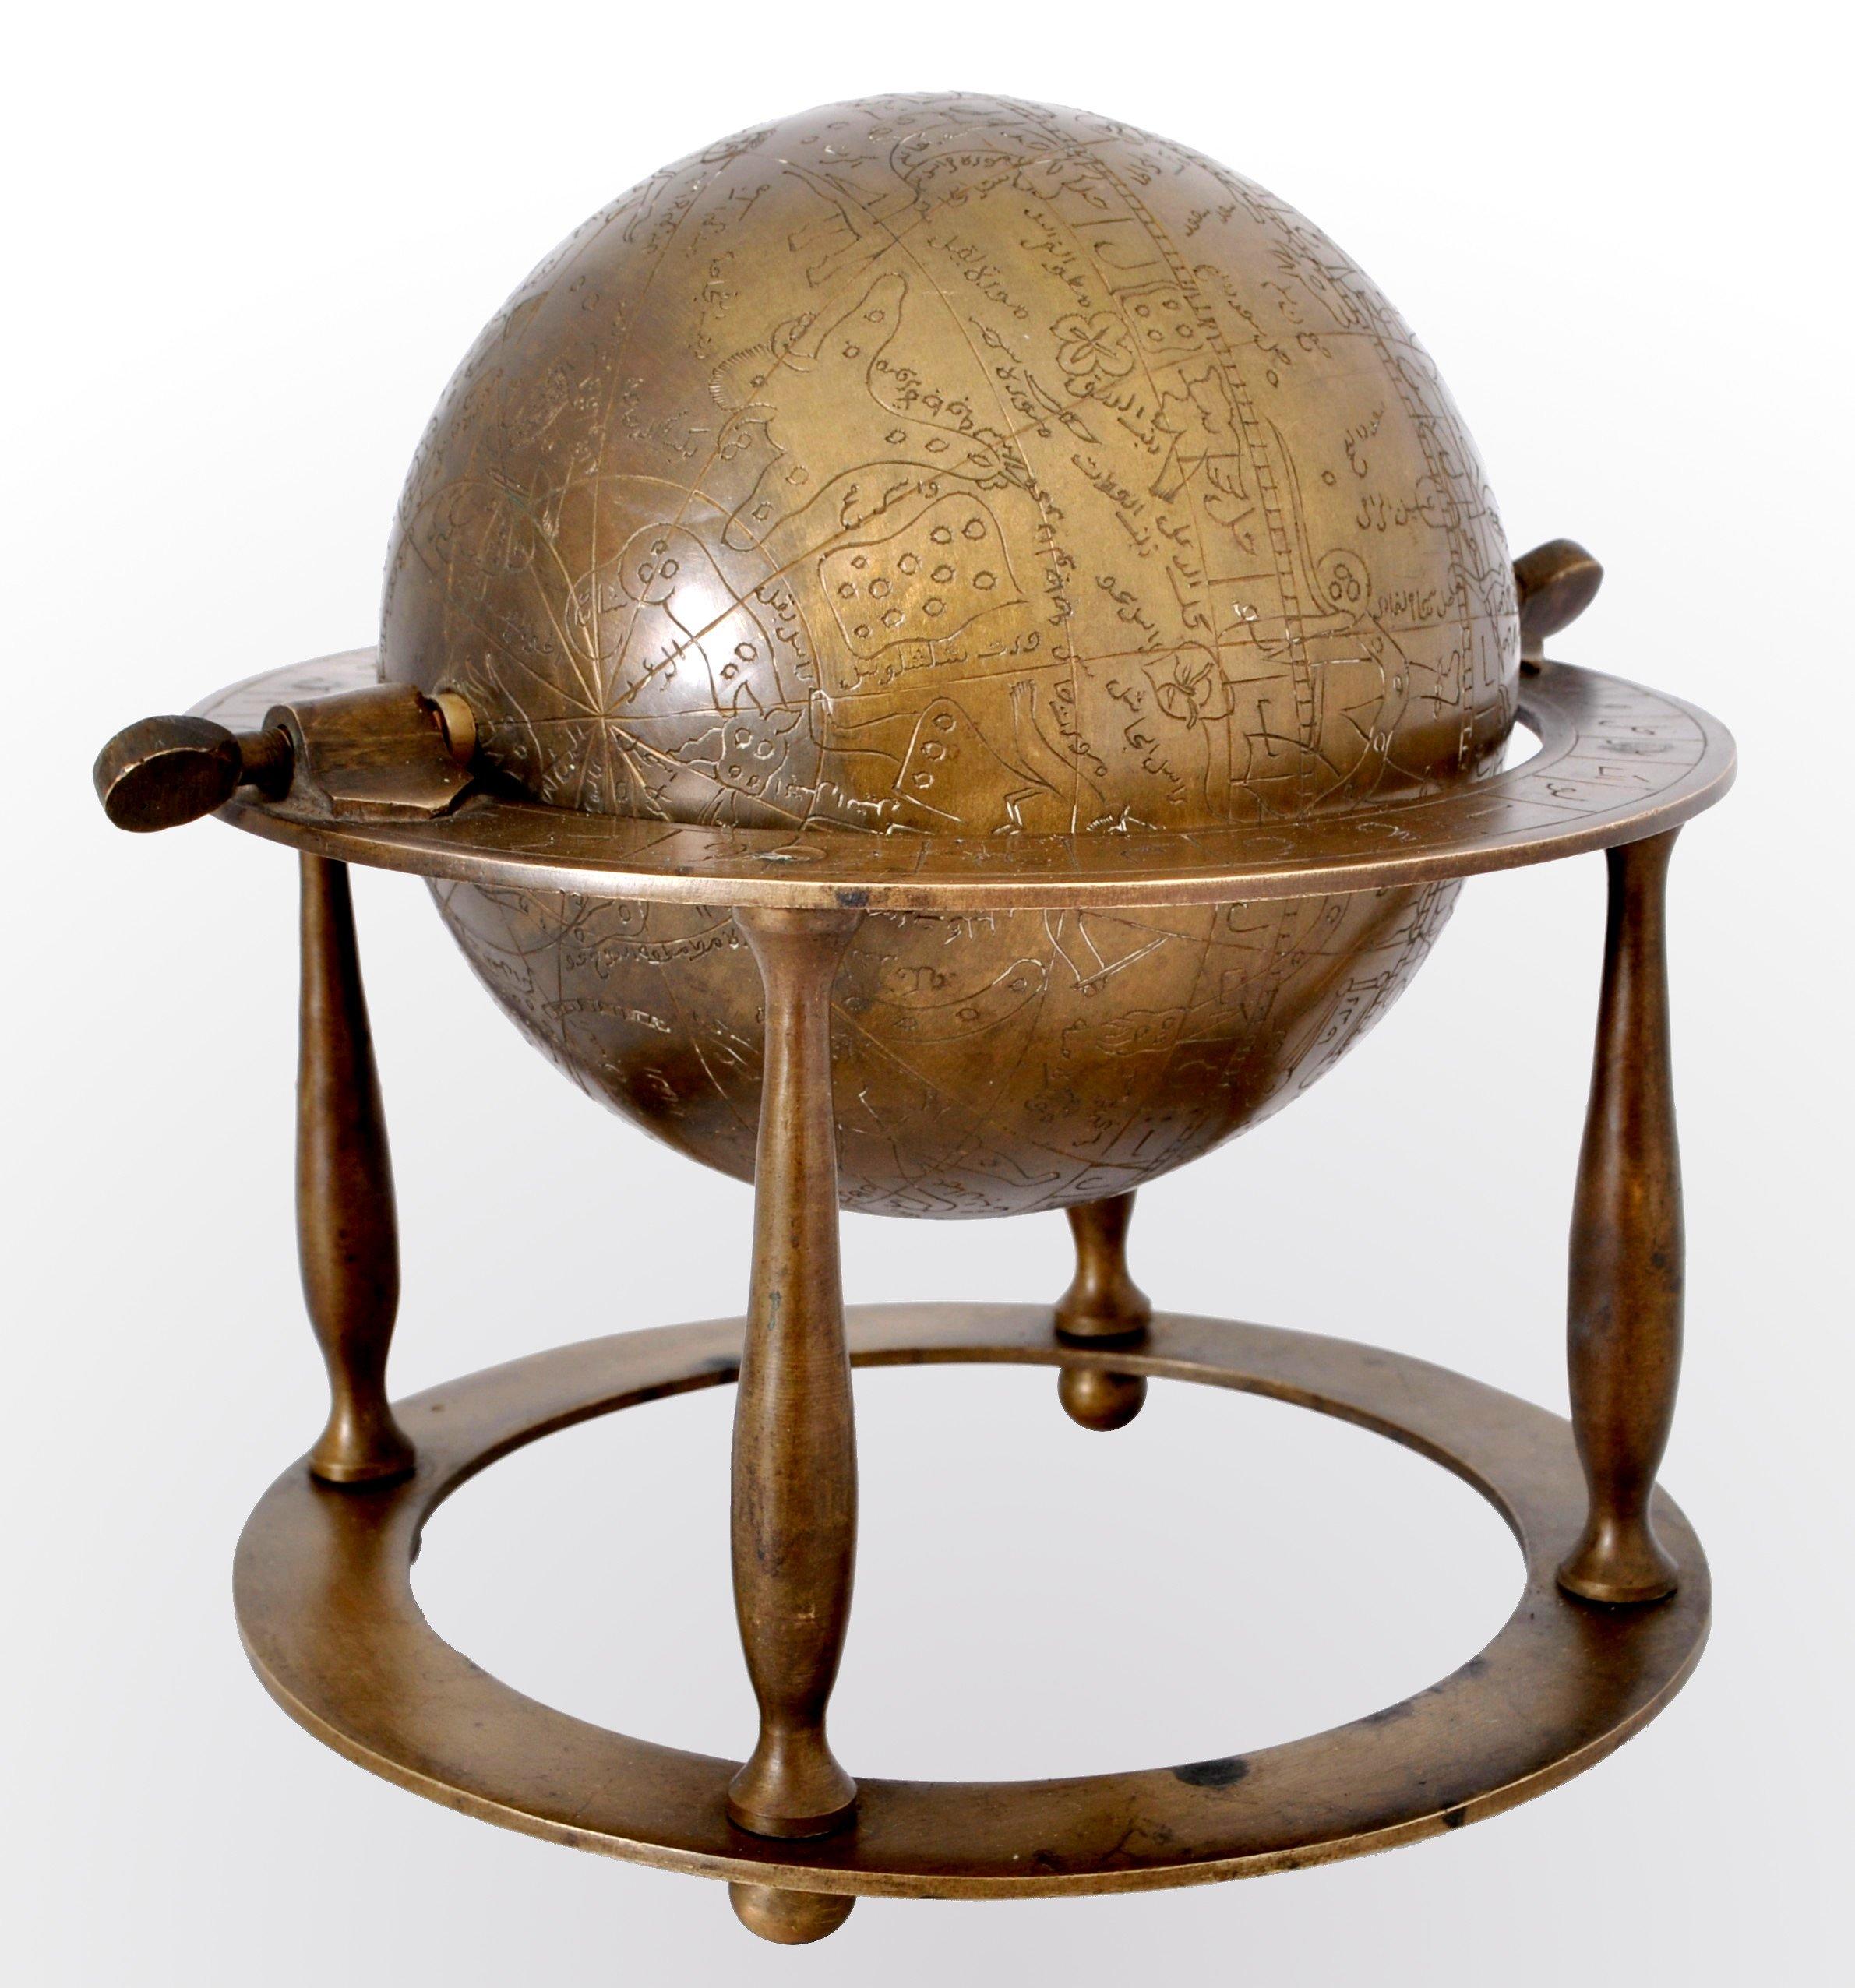 A good antique Islamic Qajar period bronze Arabic armillary (spherical astrolabe), celestial globe, circa 1850. The globe having a graduated ring & standing on four blustered legs, the hollow sphere mounted on an axle & is ornately engraved with